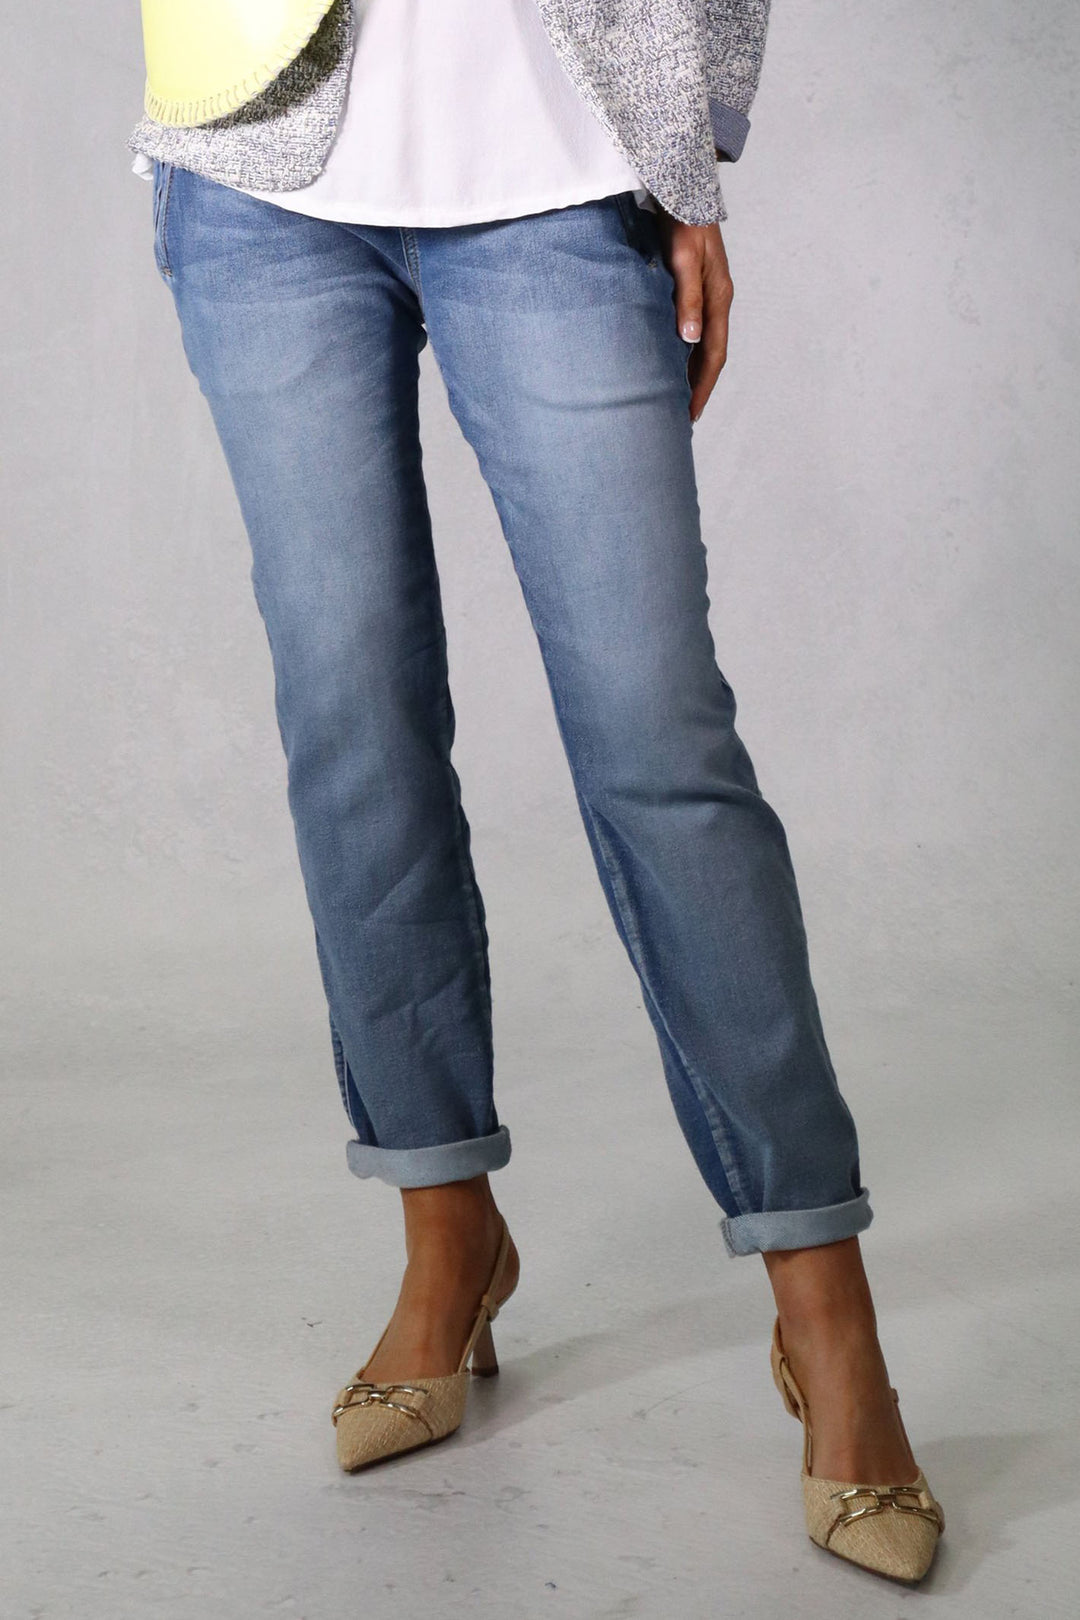 Deck 822601 Blue Pull-On Stretch Jeans - Rouge Boutique Inverness